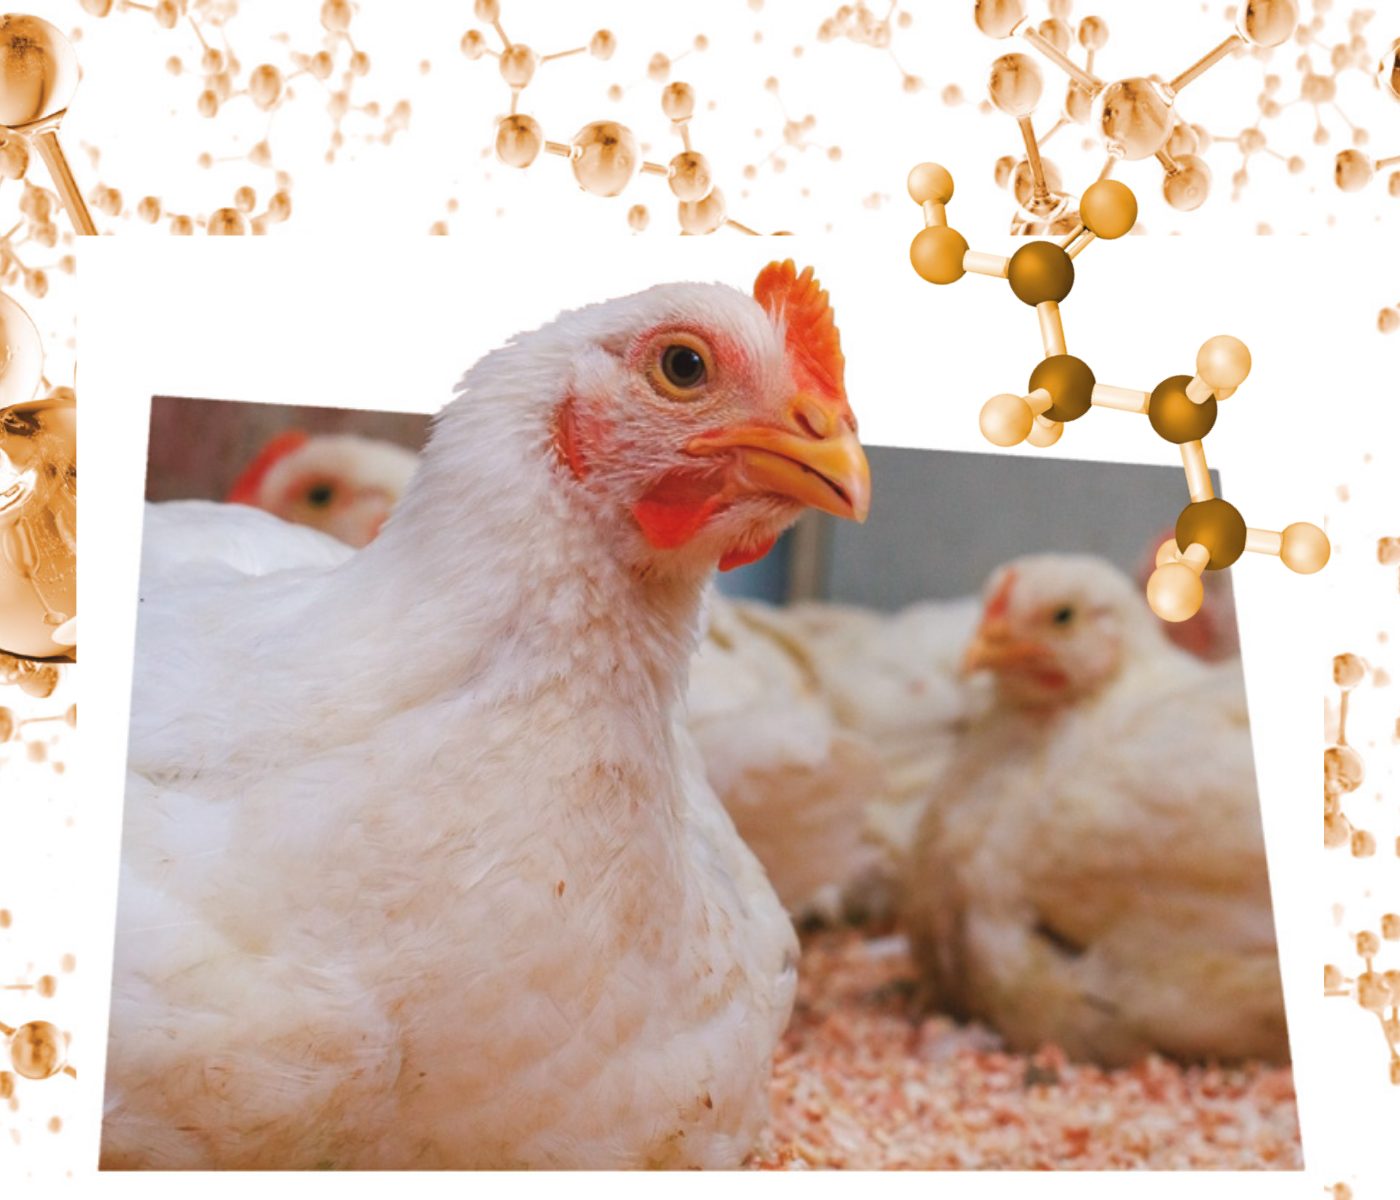 Butyric acid: A nutritional alternative to antibiotics in poultry nutrition